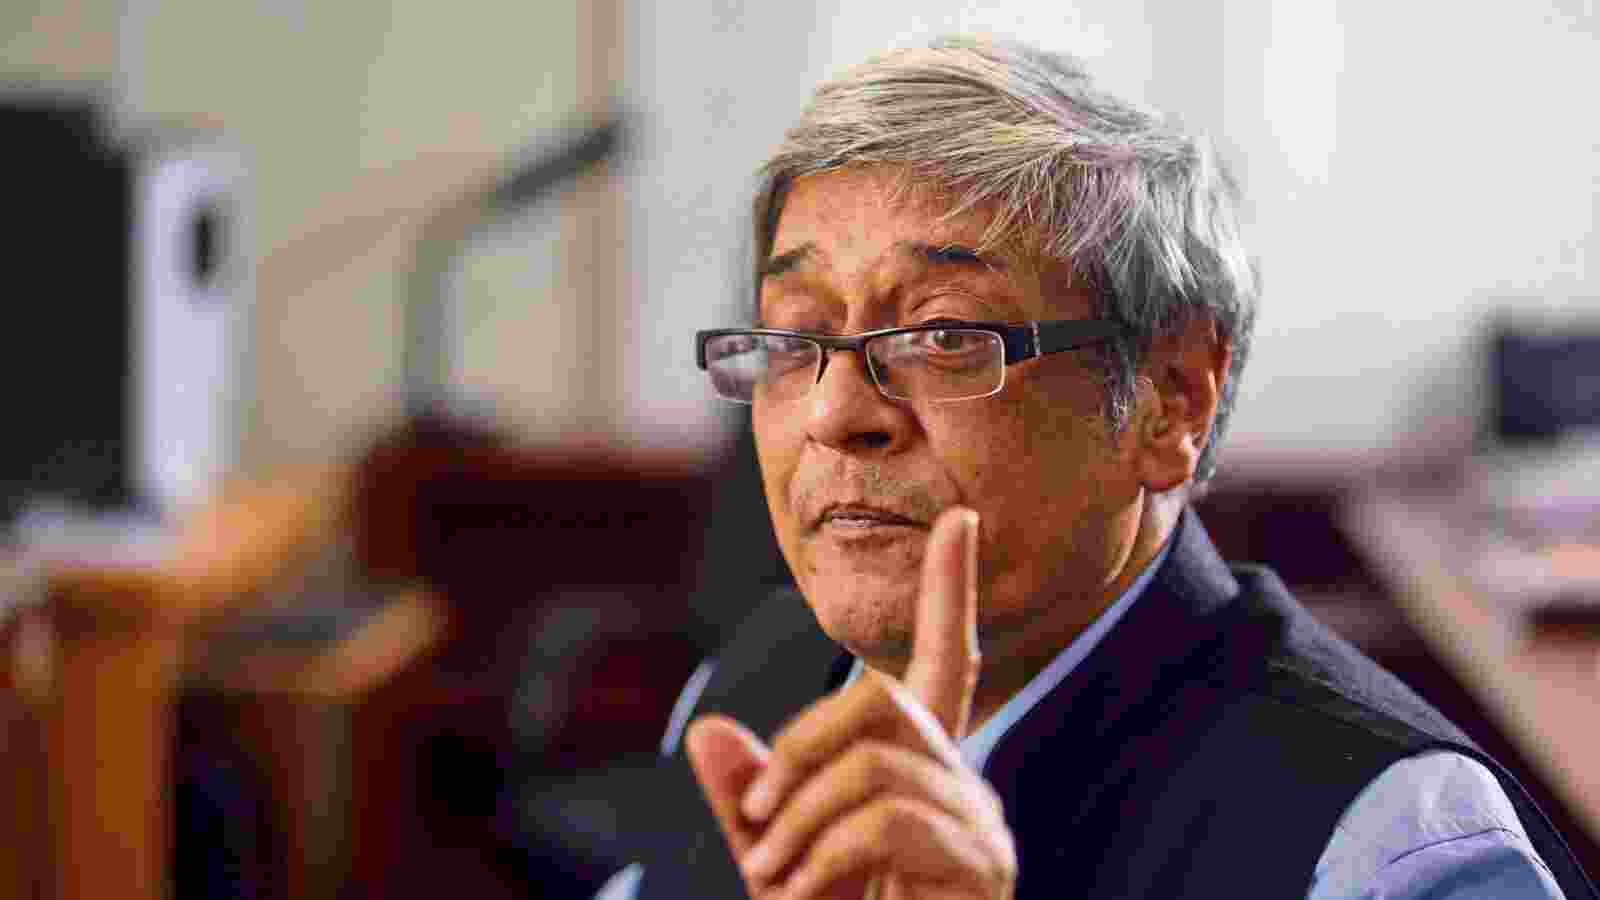 With the results of the first round of the Household Consumer Expenditure Survey (HCES) 2022-23 now available, Bibek Debroy, Chairman of the Economic Advisory Council to the Prime Minister, has called for a new estimate for the poverty line in India.